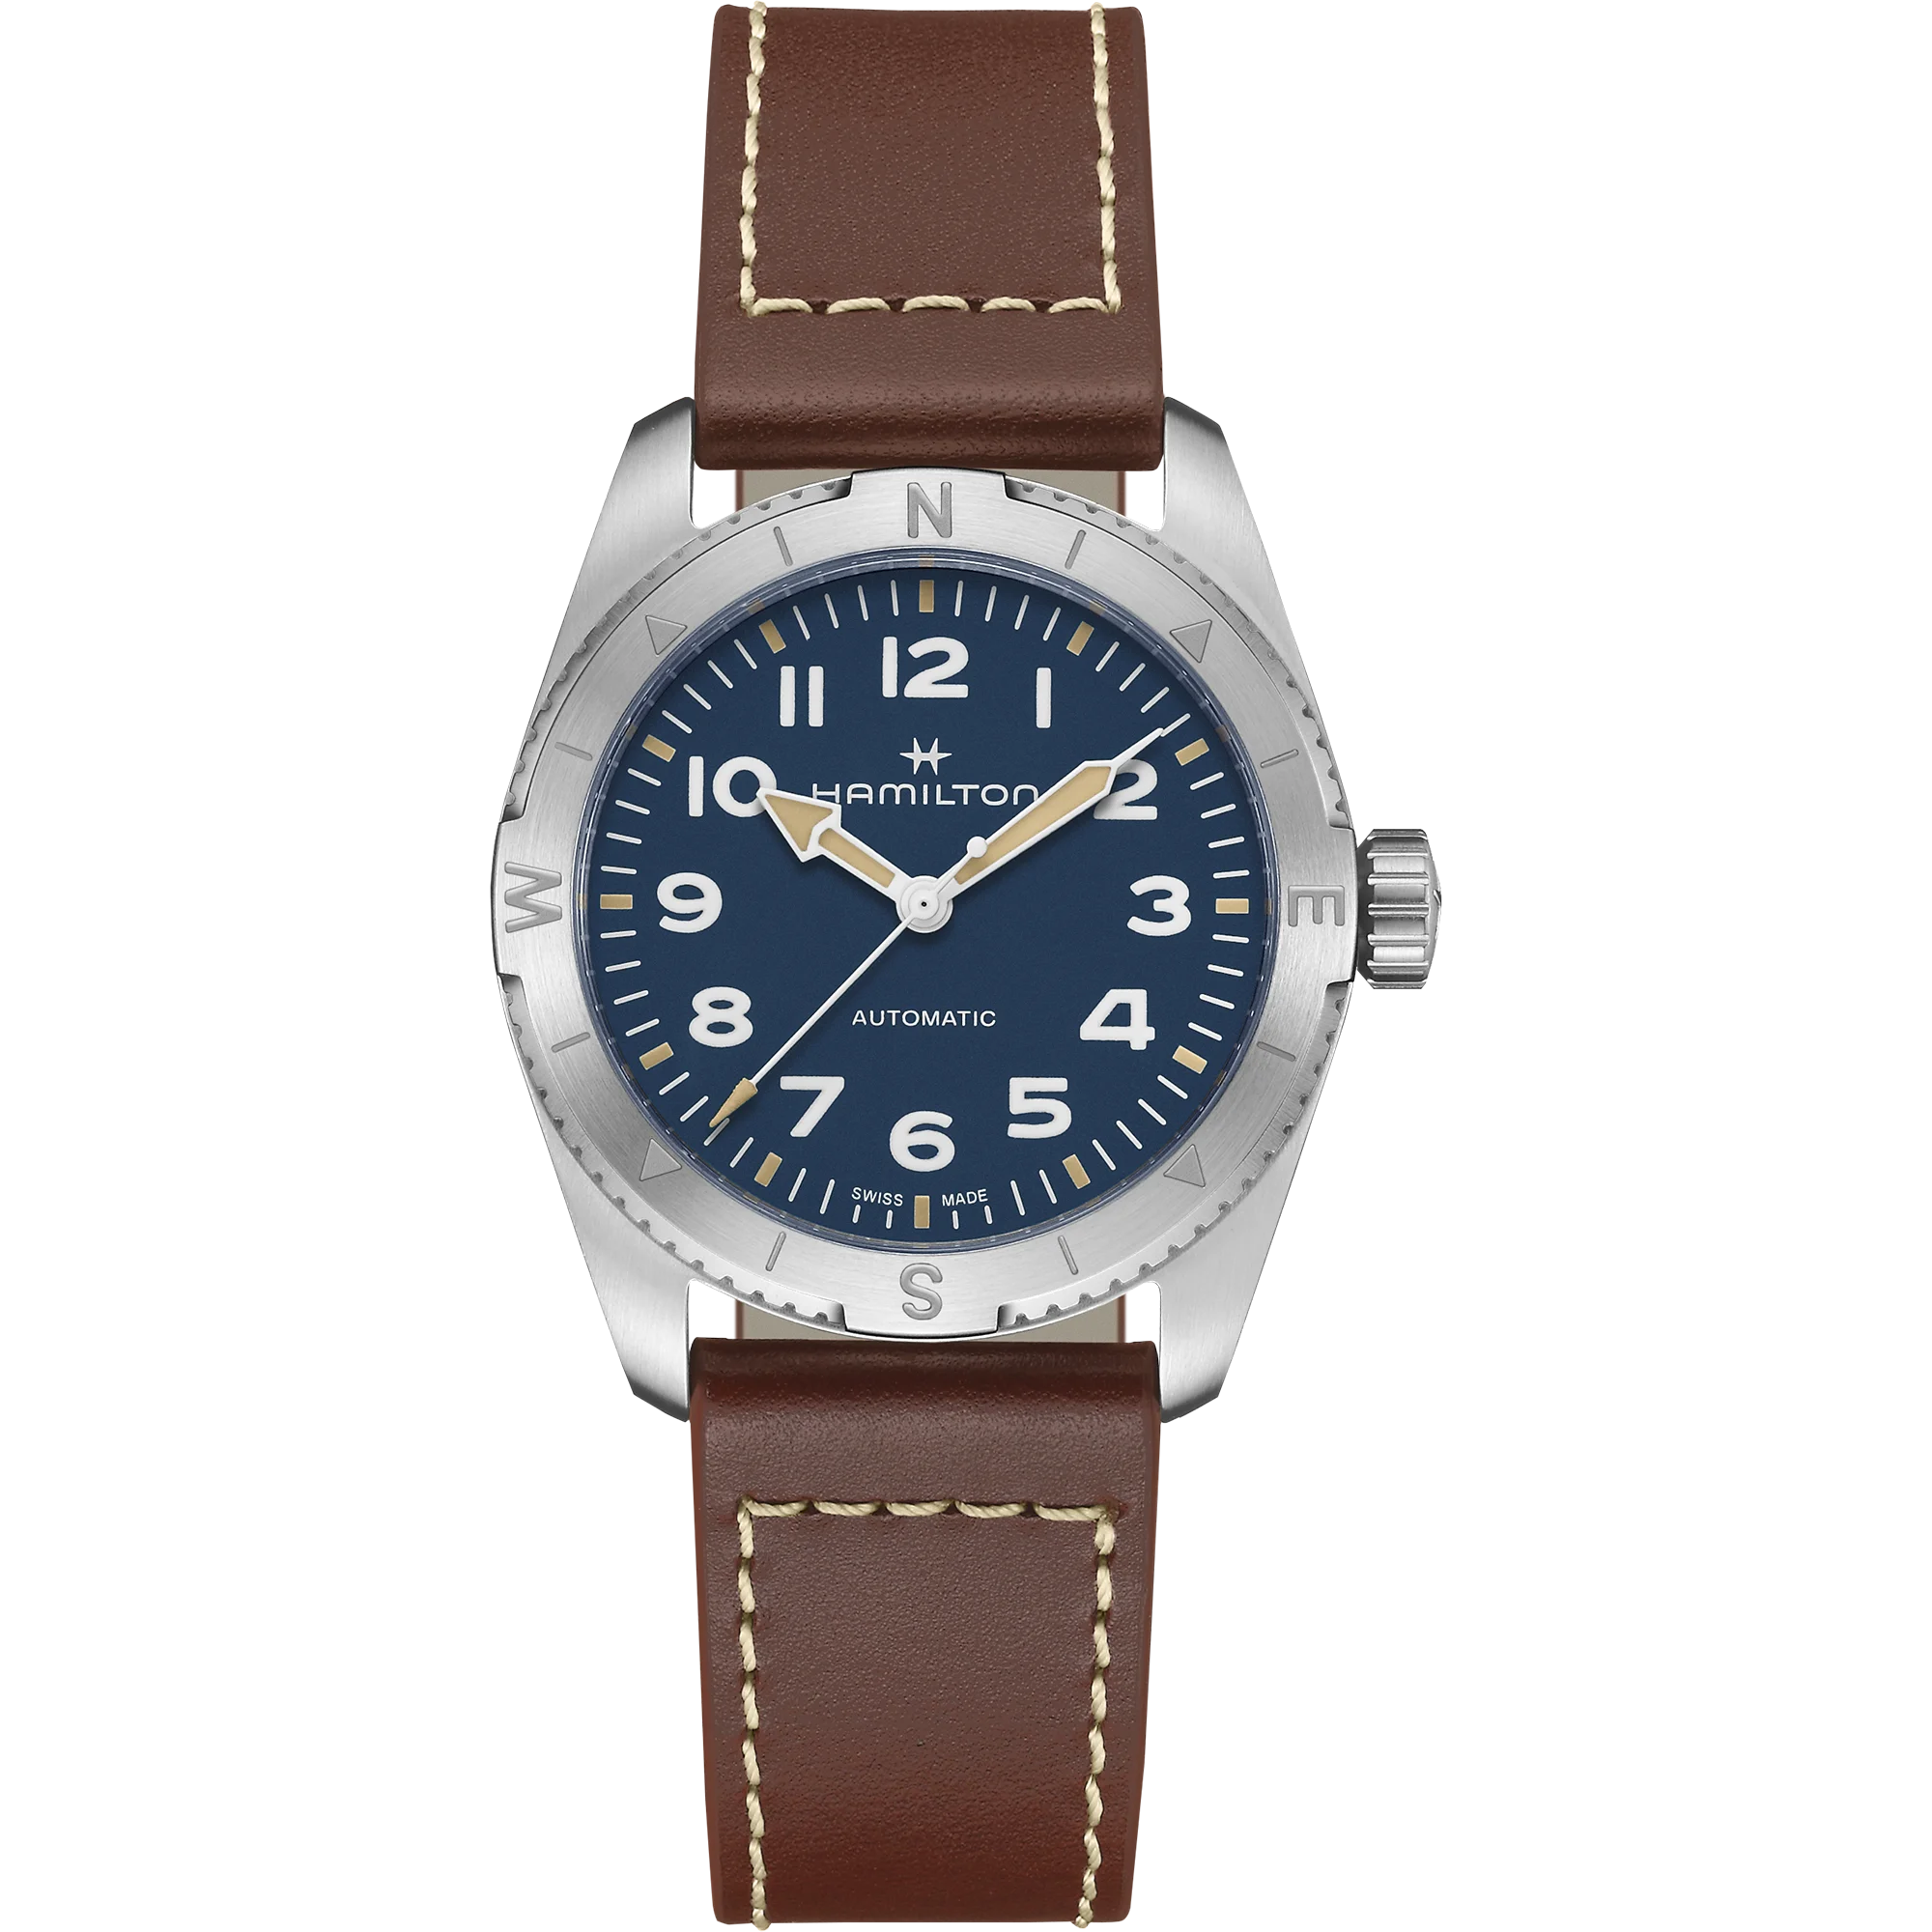 Khaki Field Expedition Auto - 37mm - H70225540